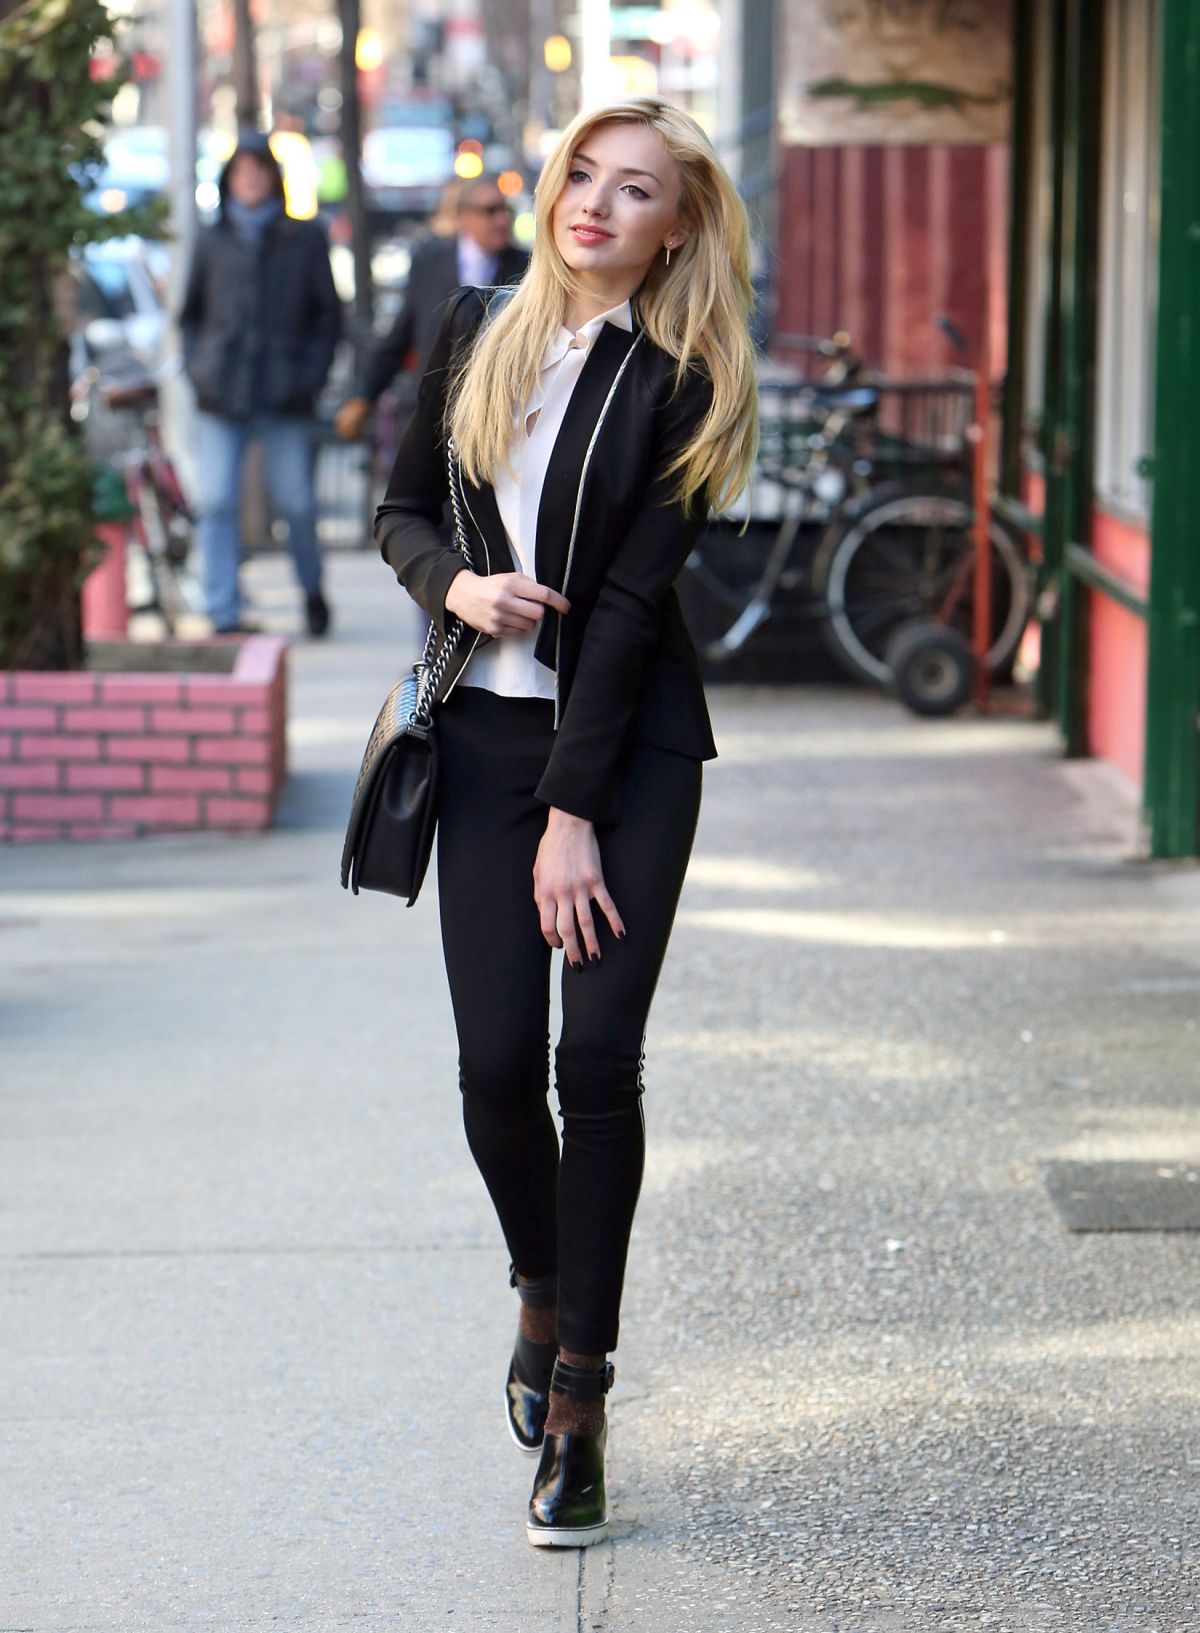 PEYTON LIST Out and About in New York.